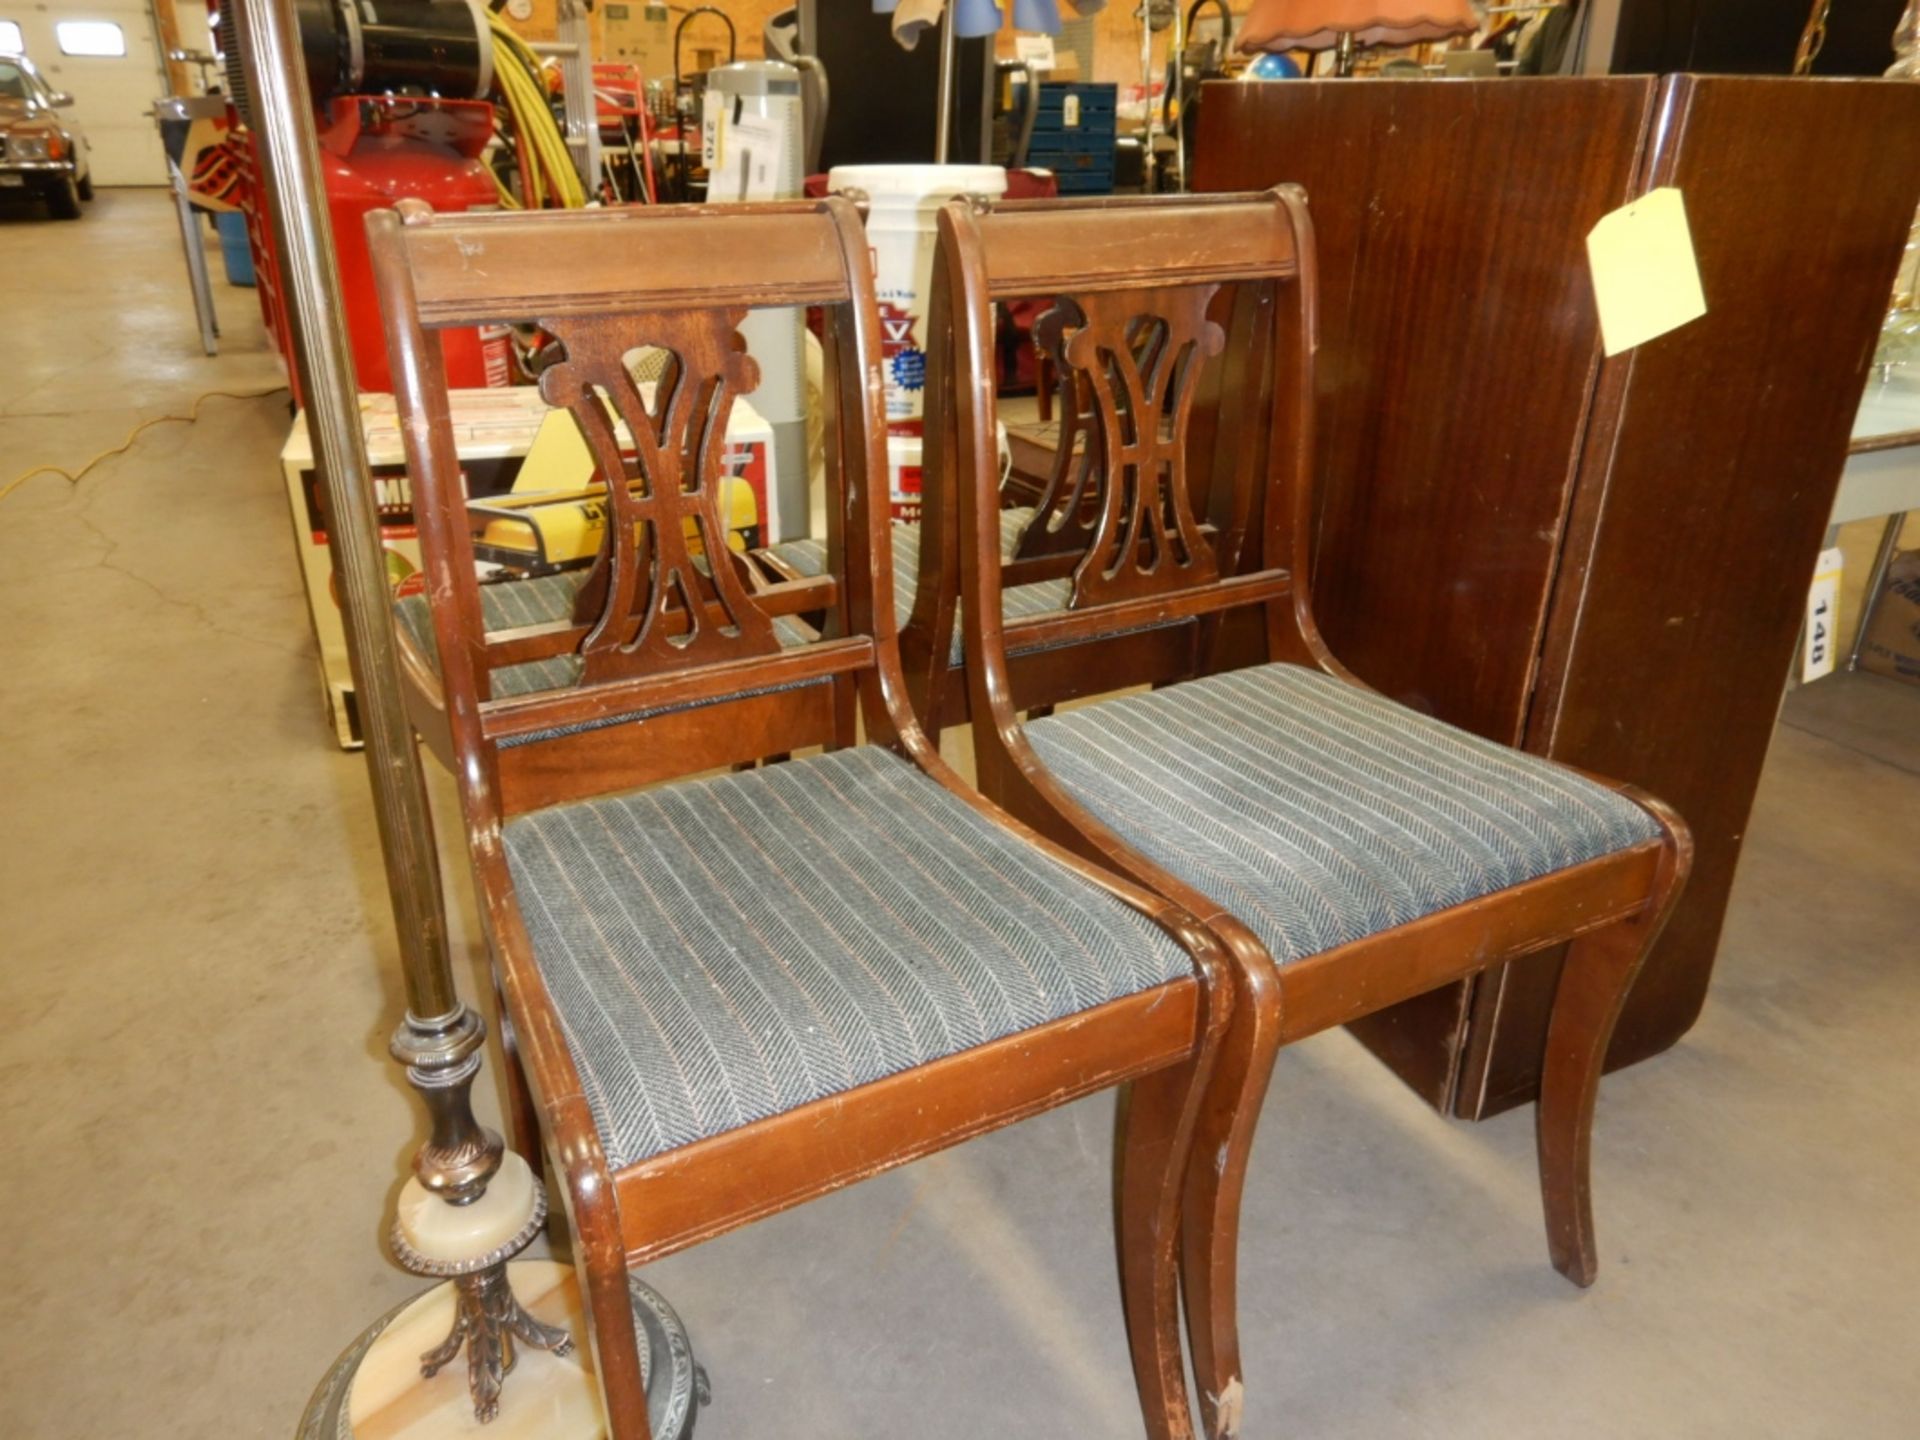 L/O 4-WOOD BACKED DINING ROOM CHAIRS W/WOOD DROP LEAF TABLE TOP - Image 2 of 3